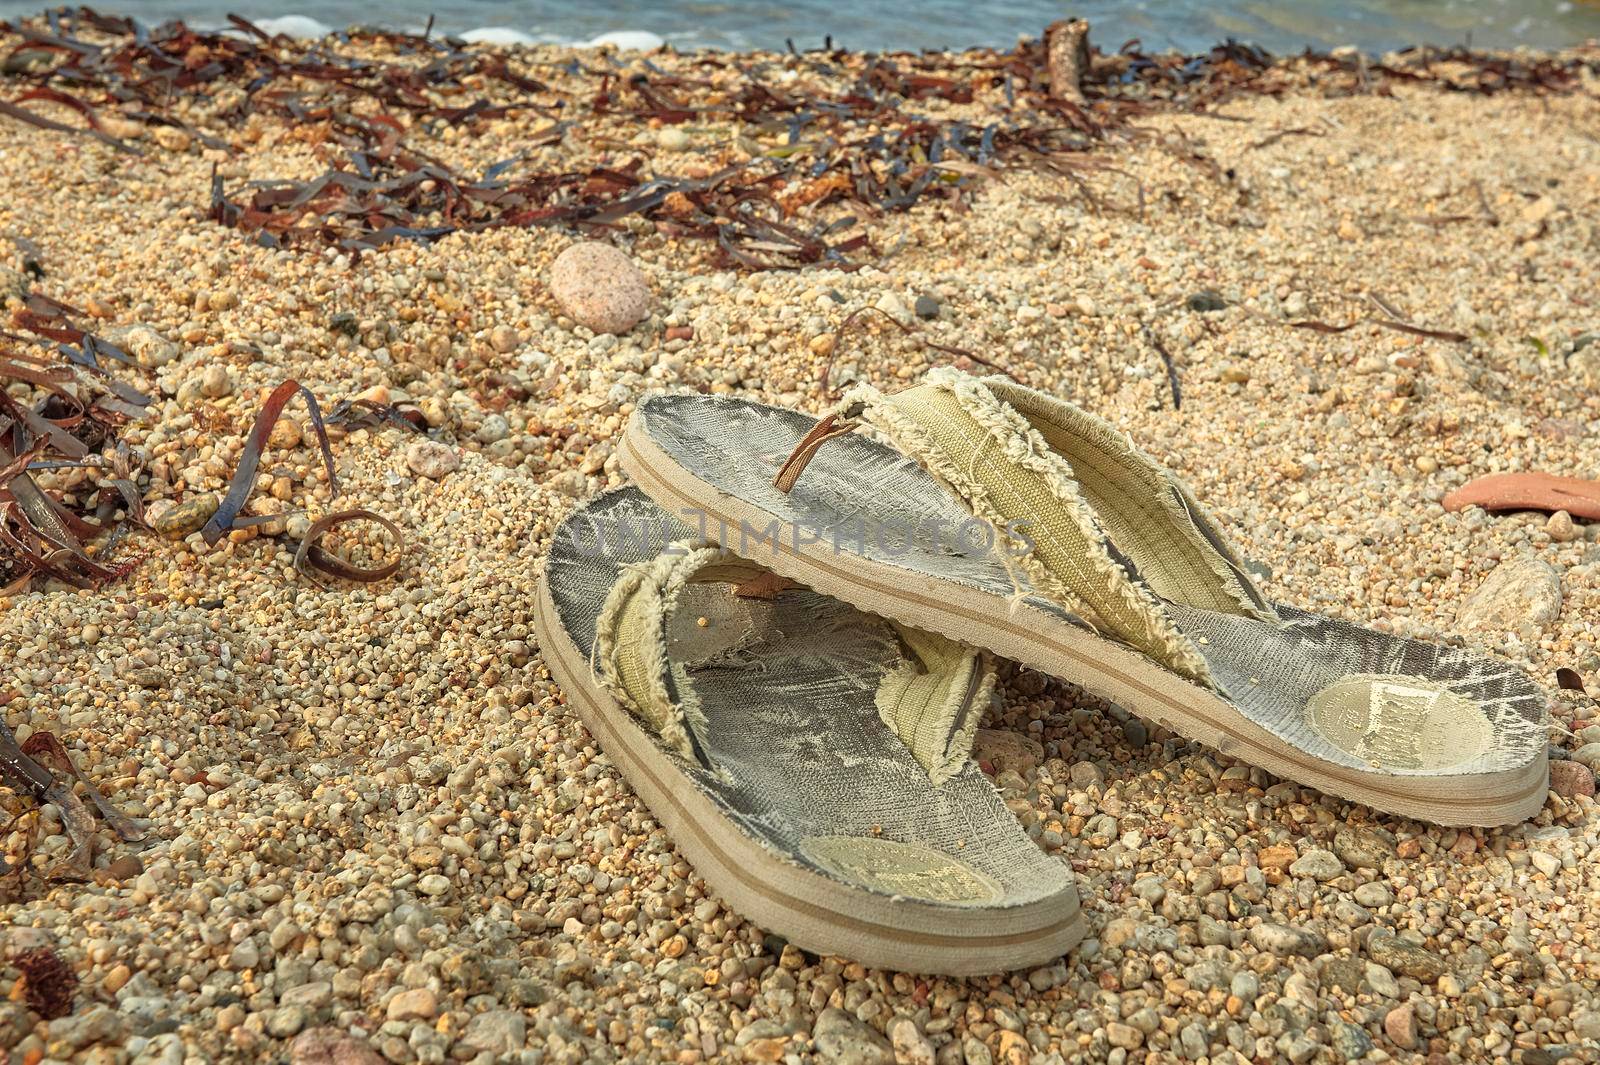 Pair of worn and worn flip-flops abandoned on the sand of the Mediterranean beach.